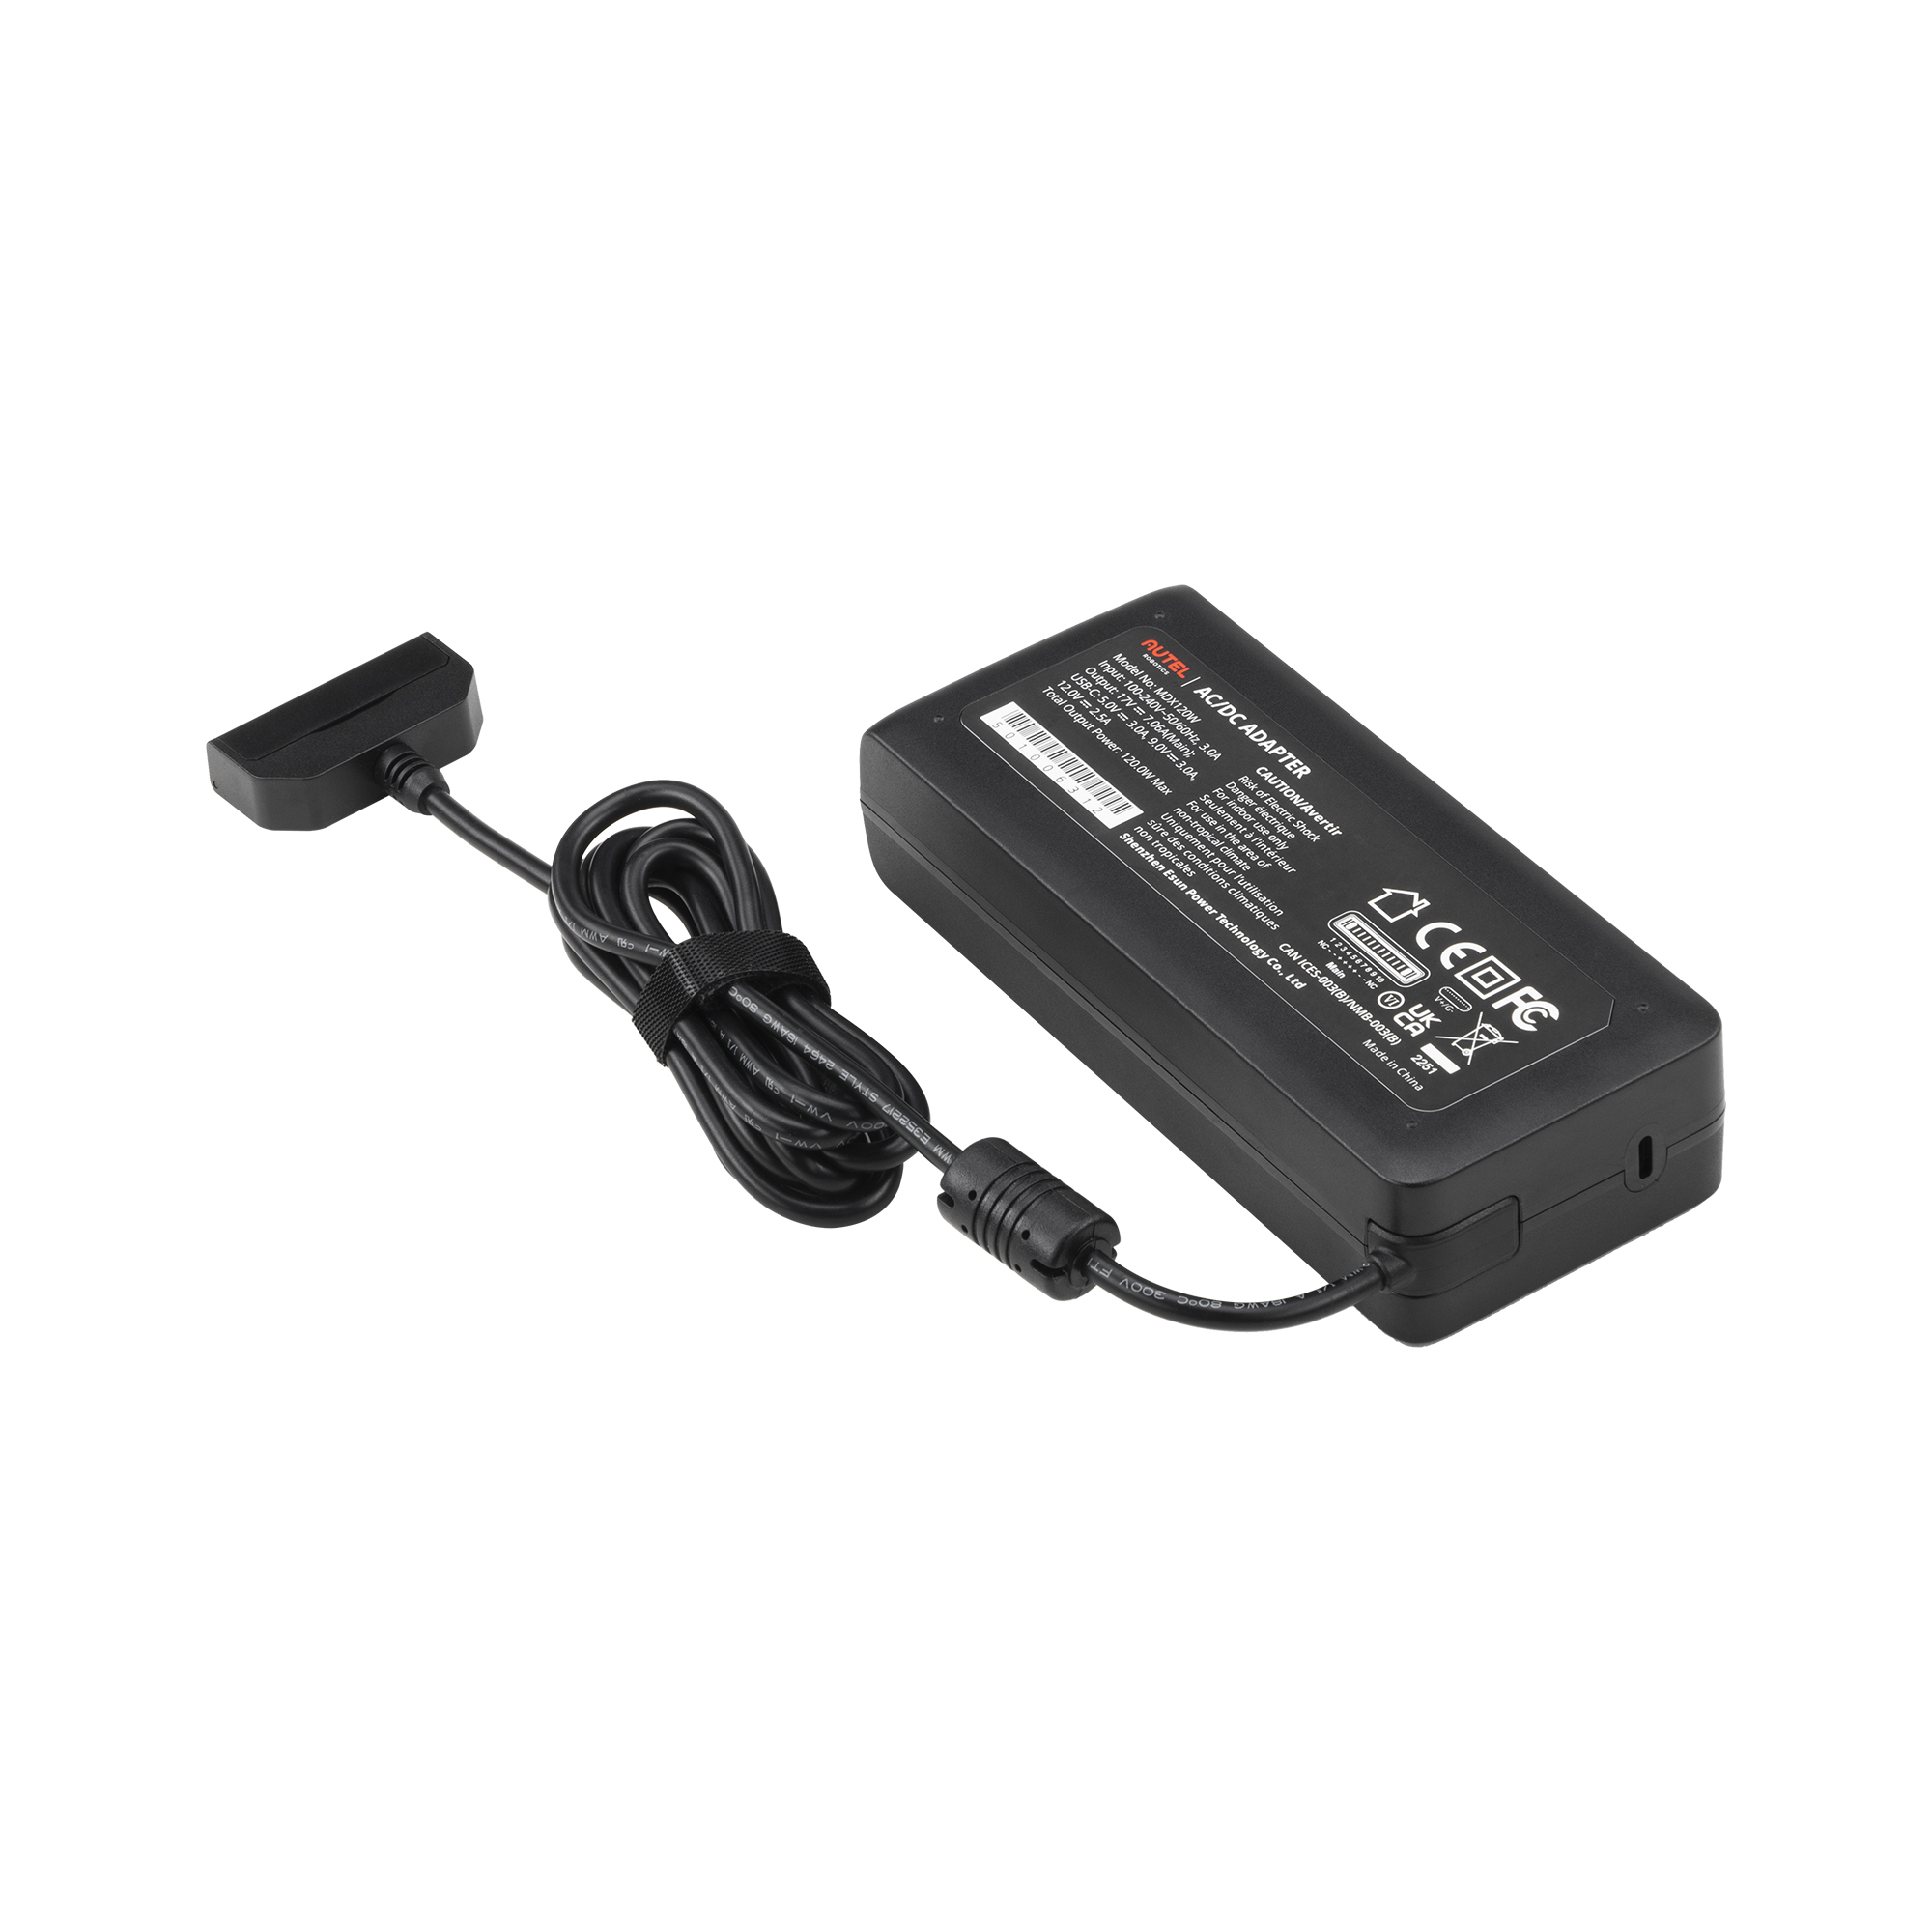 EVO Max 4T_Battery_Charger_002